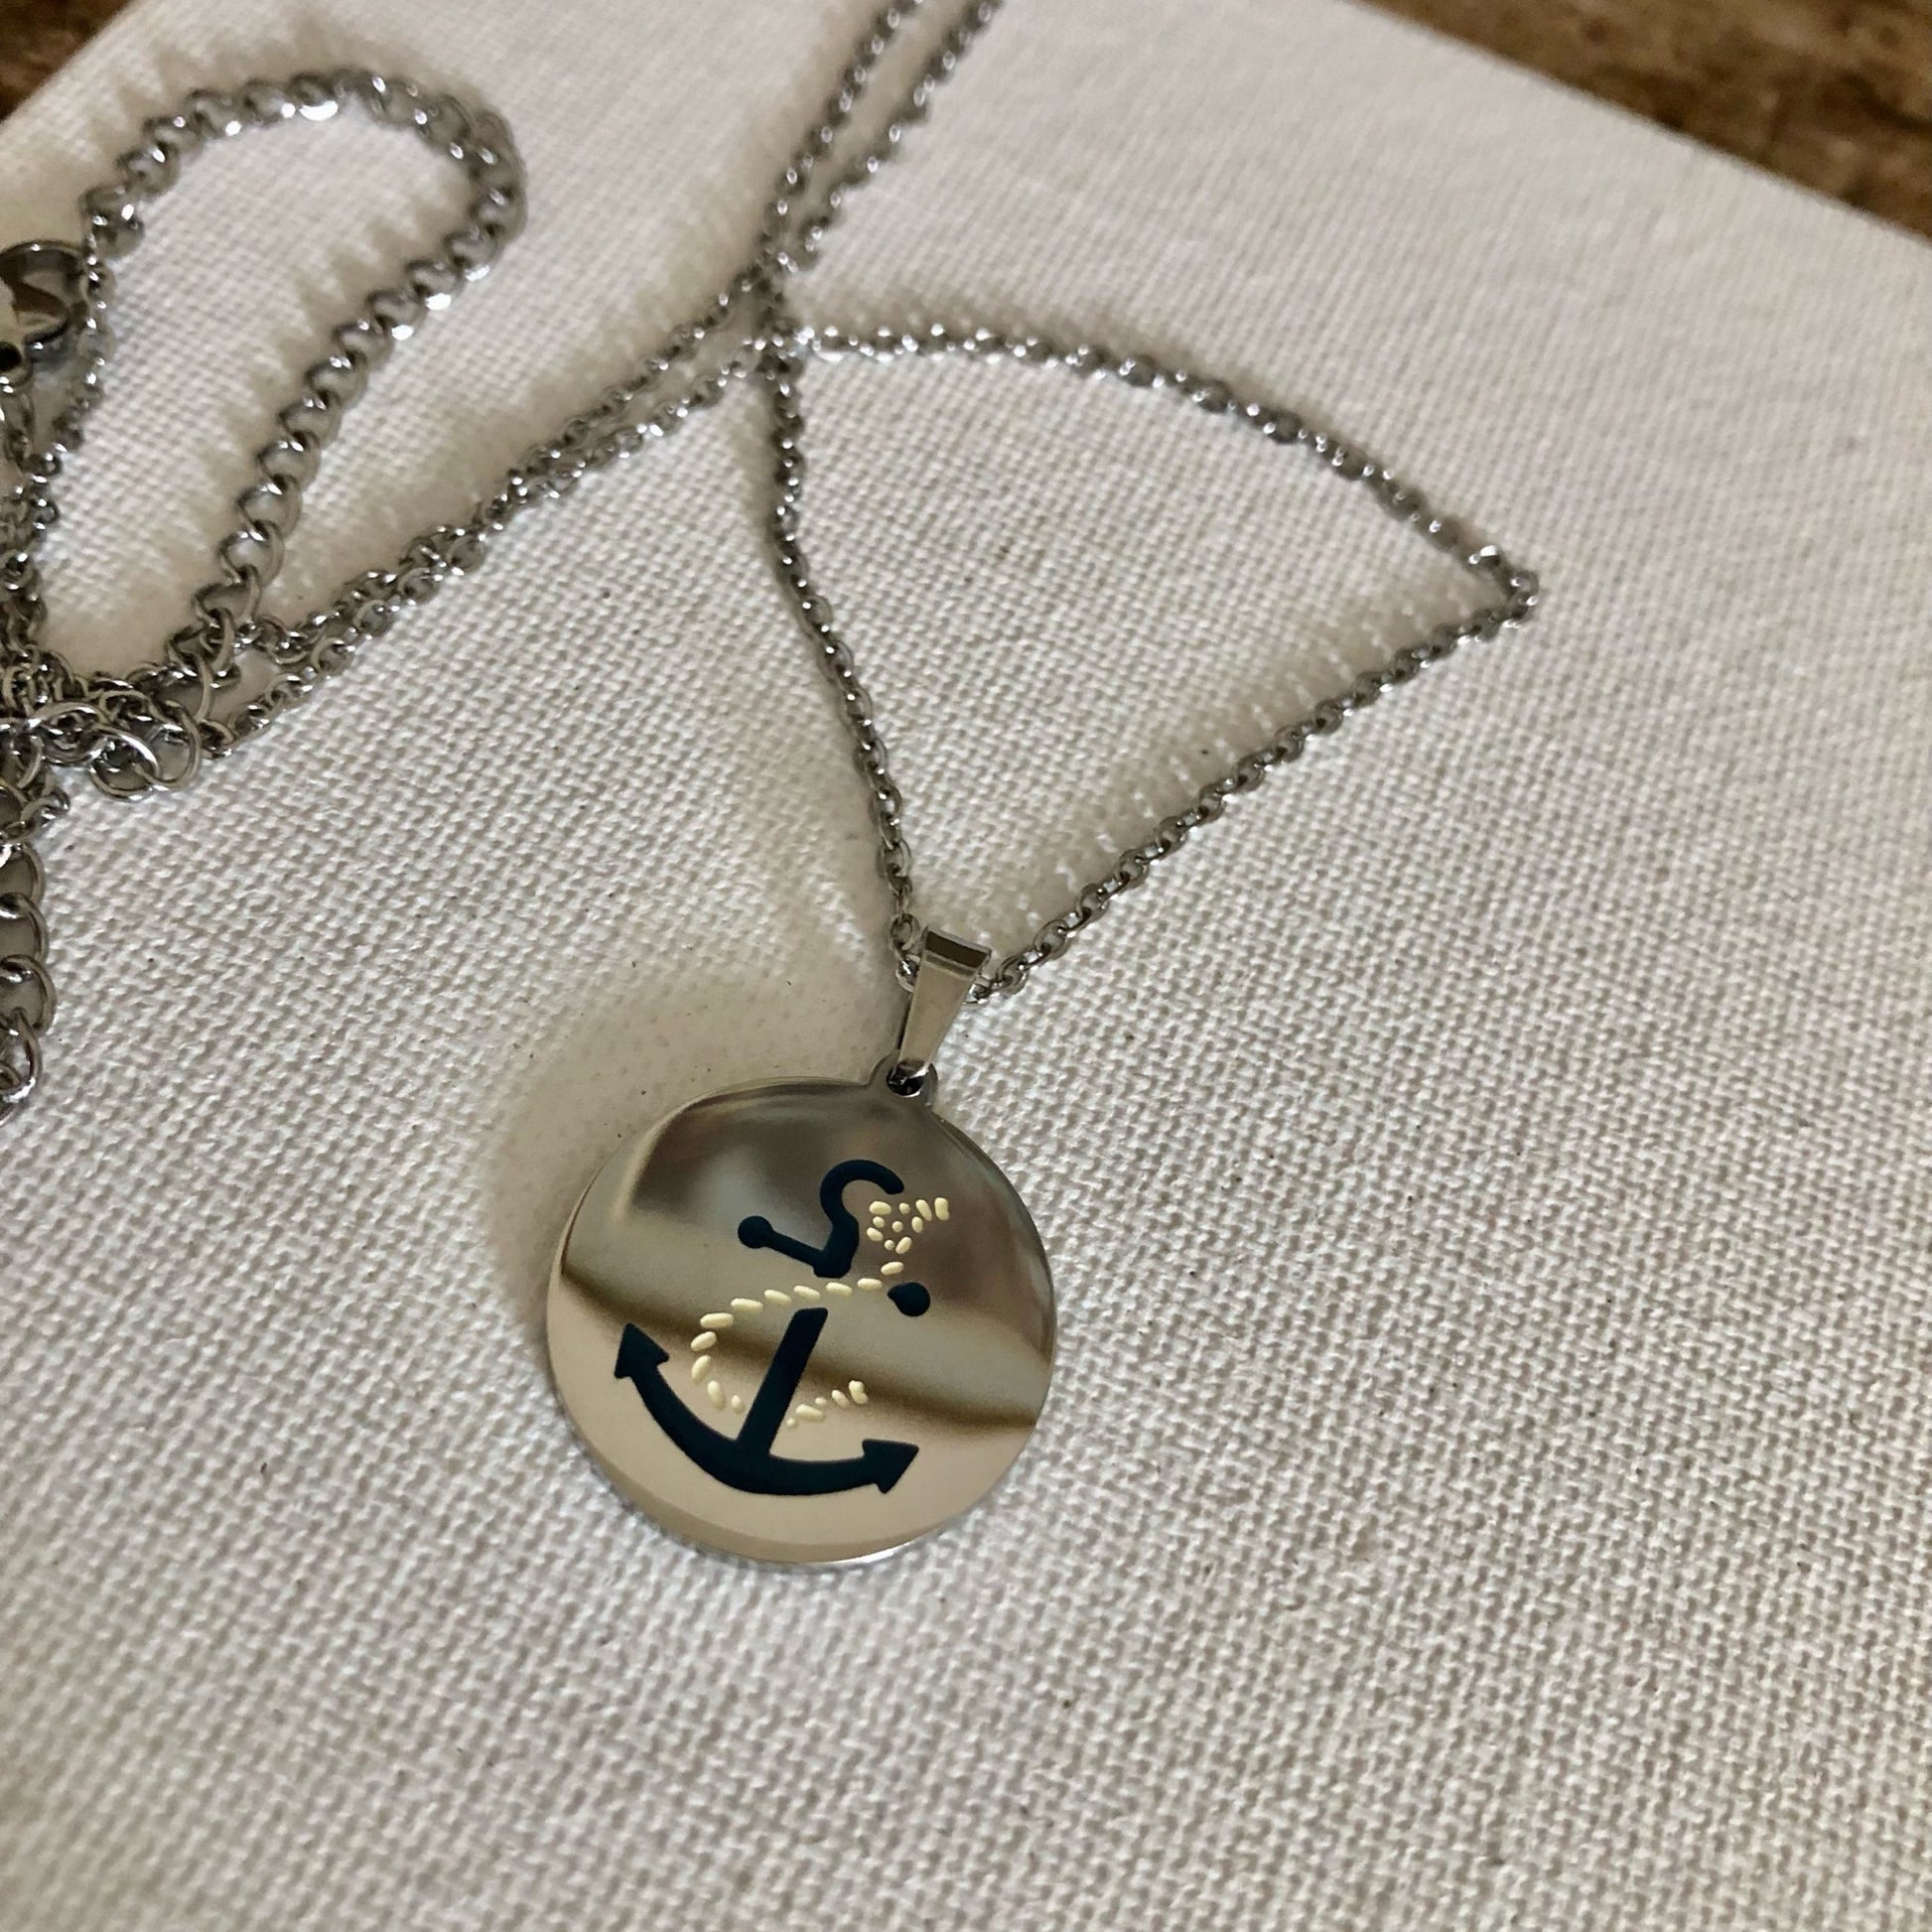 Anchor on Disk Necklace